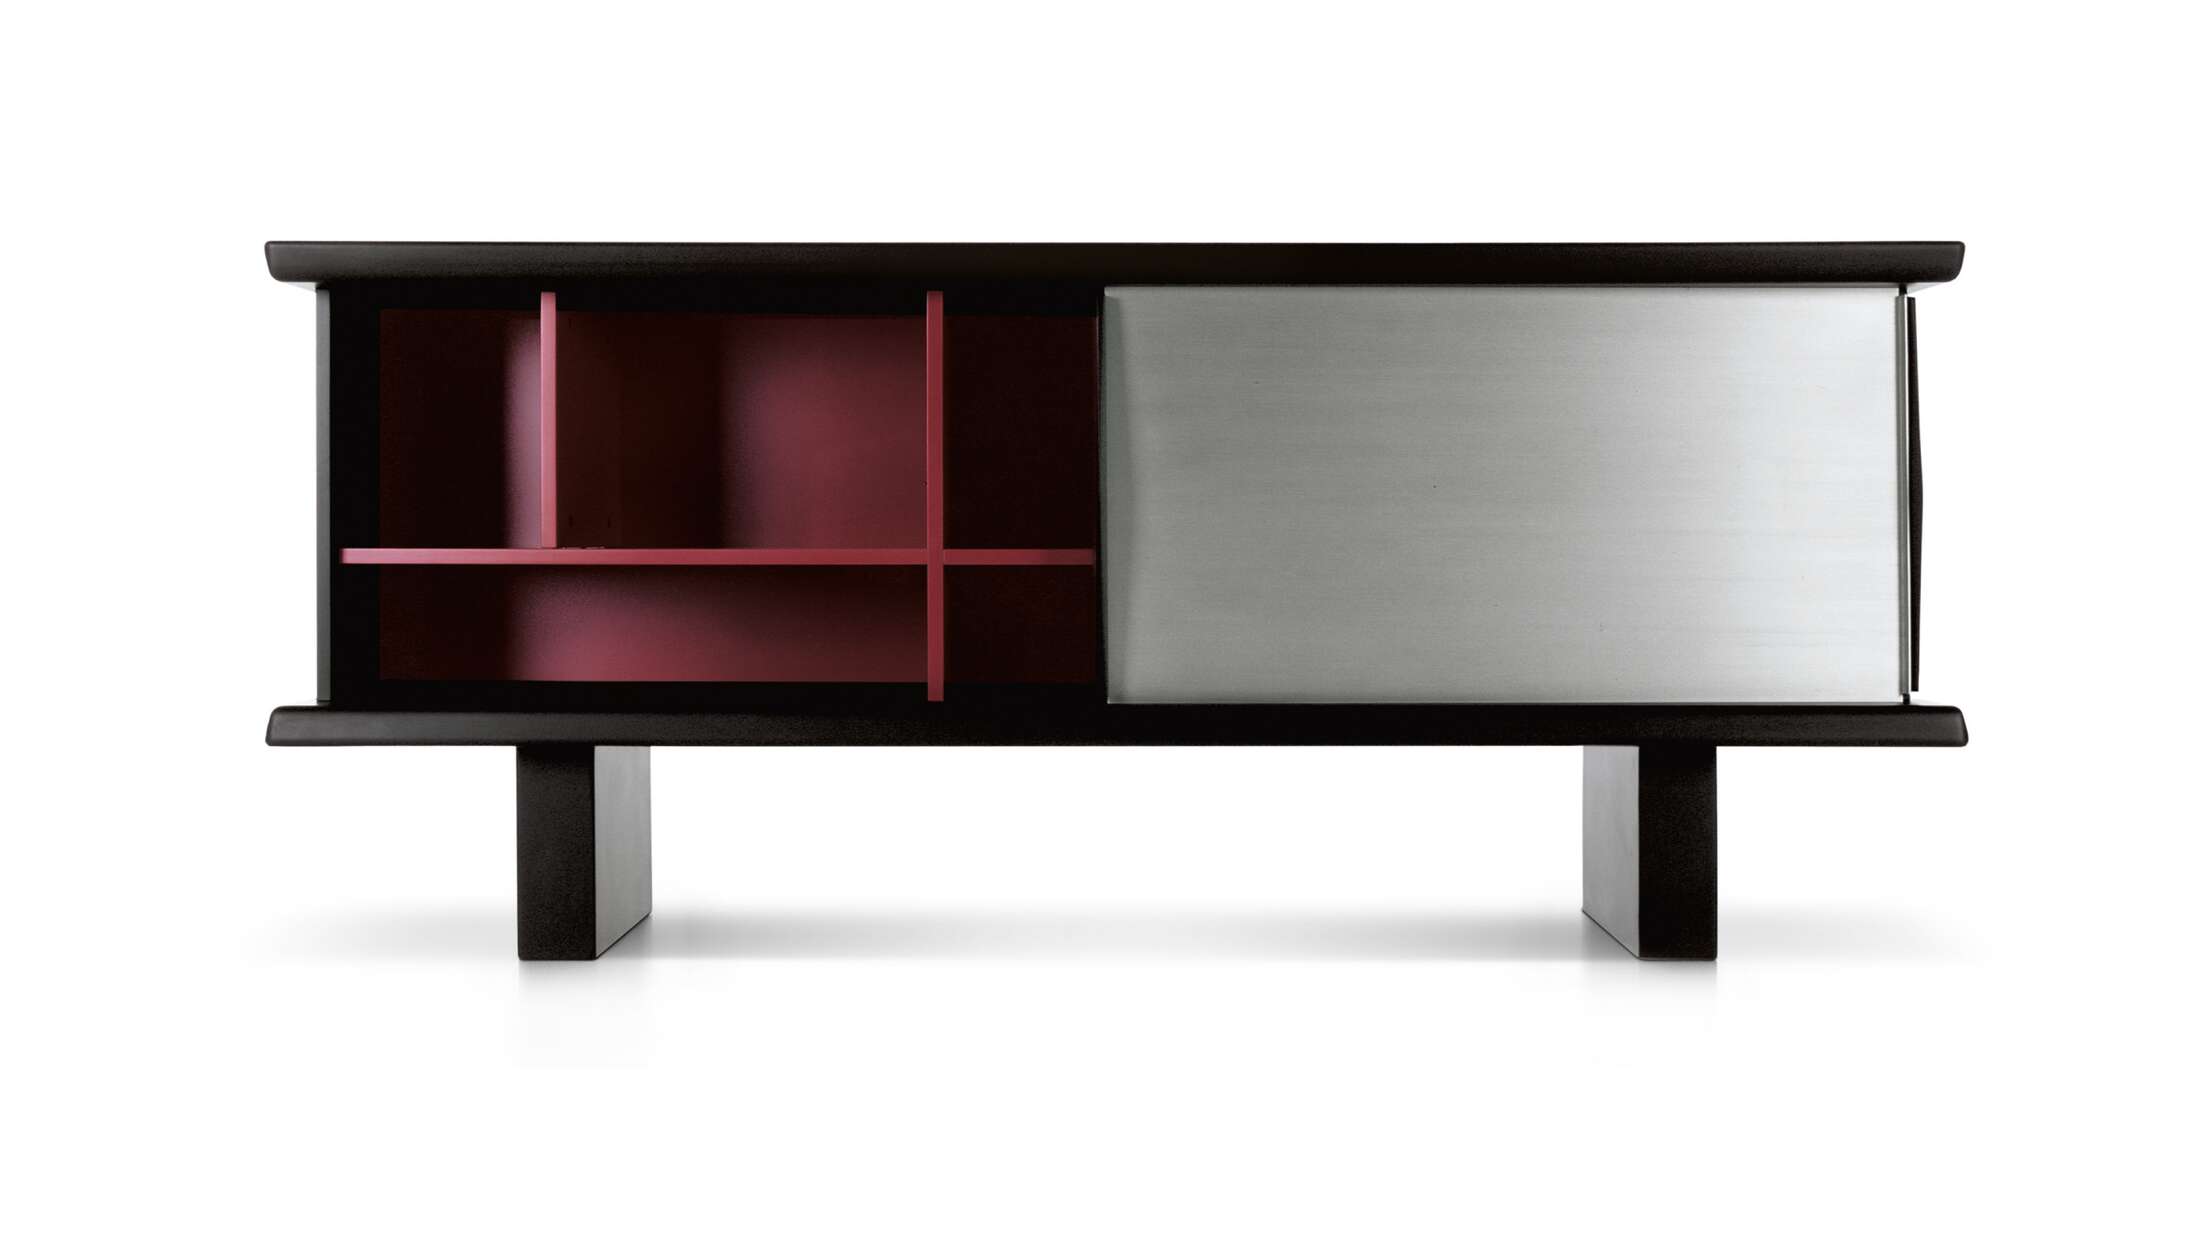 Prices vary dependent on the material/finish. Available in anodized aluminum, black painted anodized aluminum and mahogany. 

The Riflesso storage unit, created in 1958 by Charlotte Perriand in association with Steph Simon, has a new iteration. As